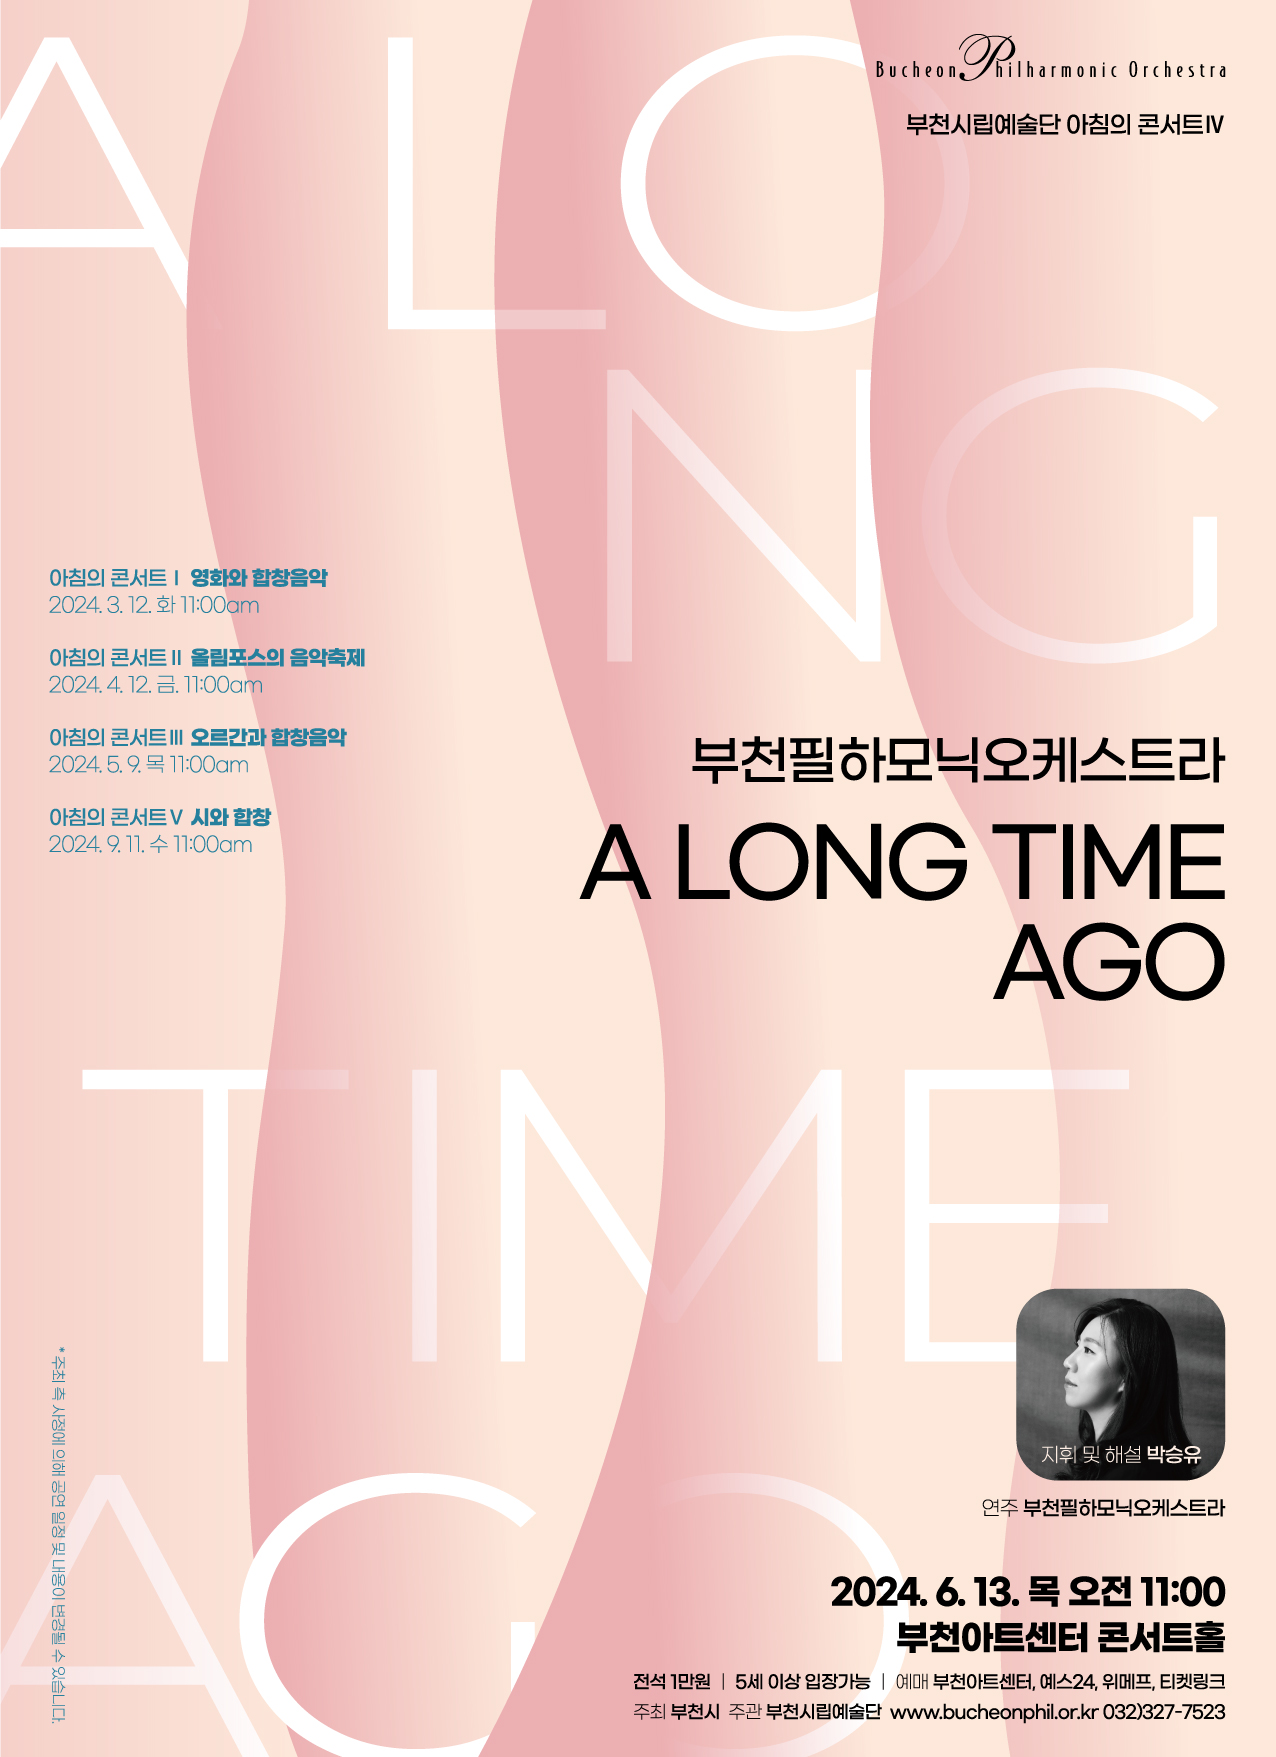 [6.13]Bucheon Philharmonic Orchestra - Classical Morning 'A long time ago'